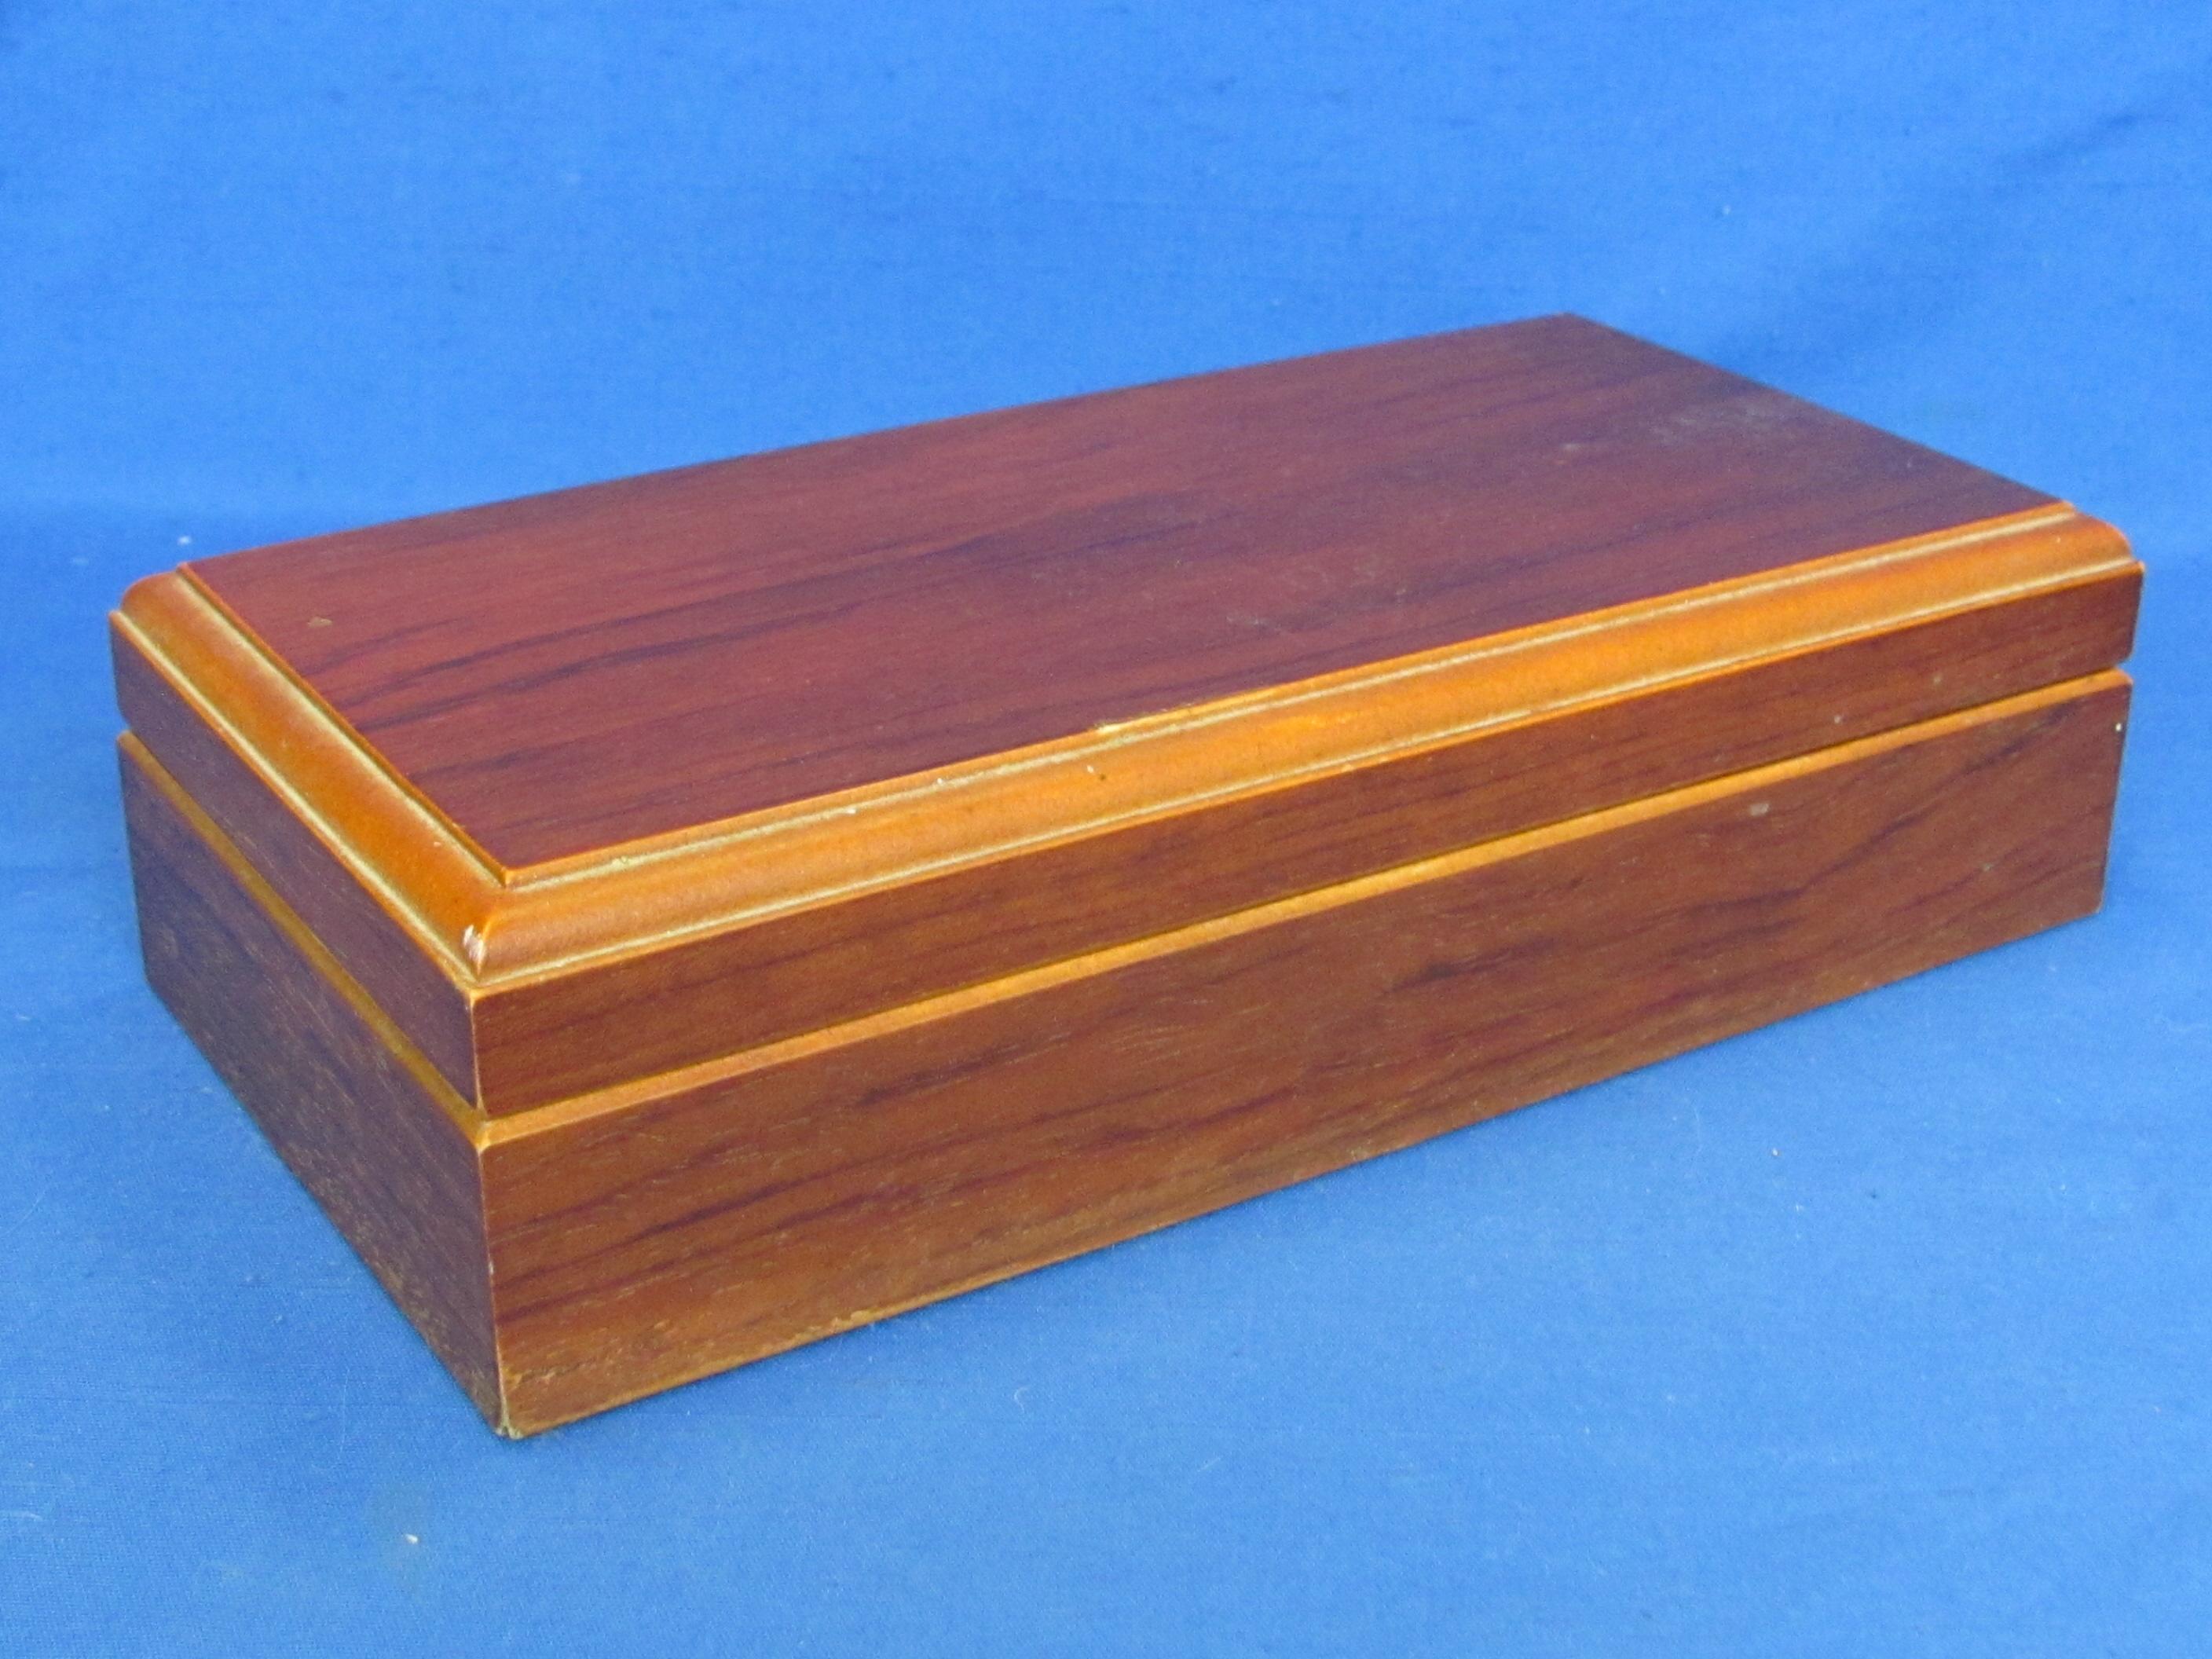 Wood Humidor with Instructions – George Burns image on inside lid – 10” x 5”